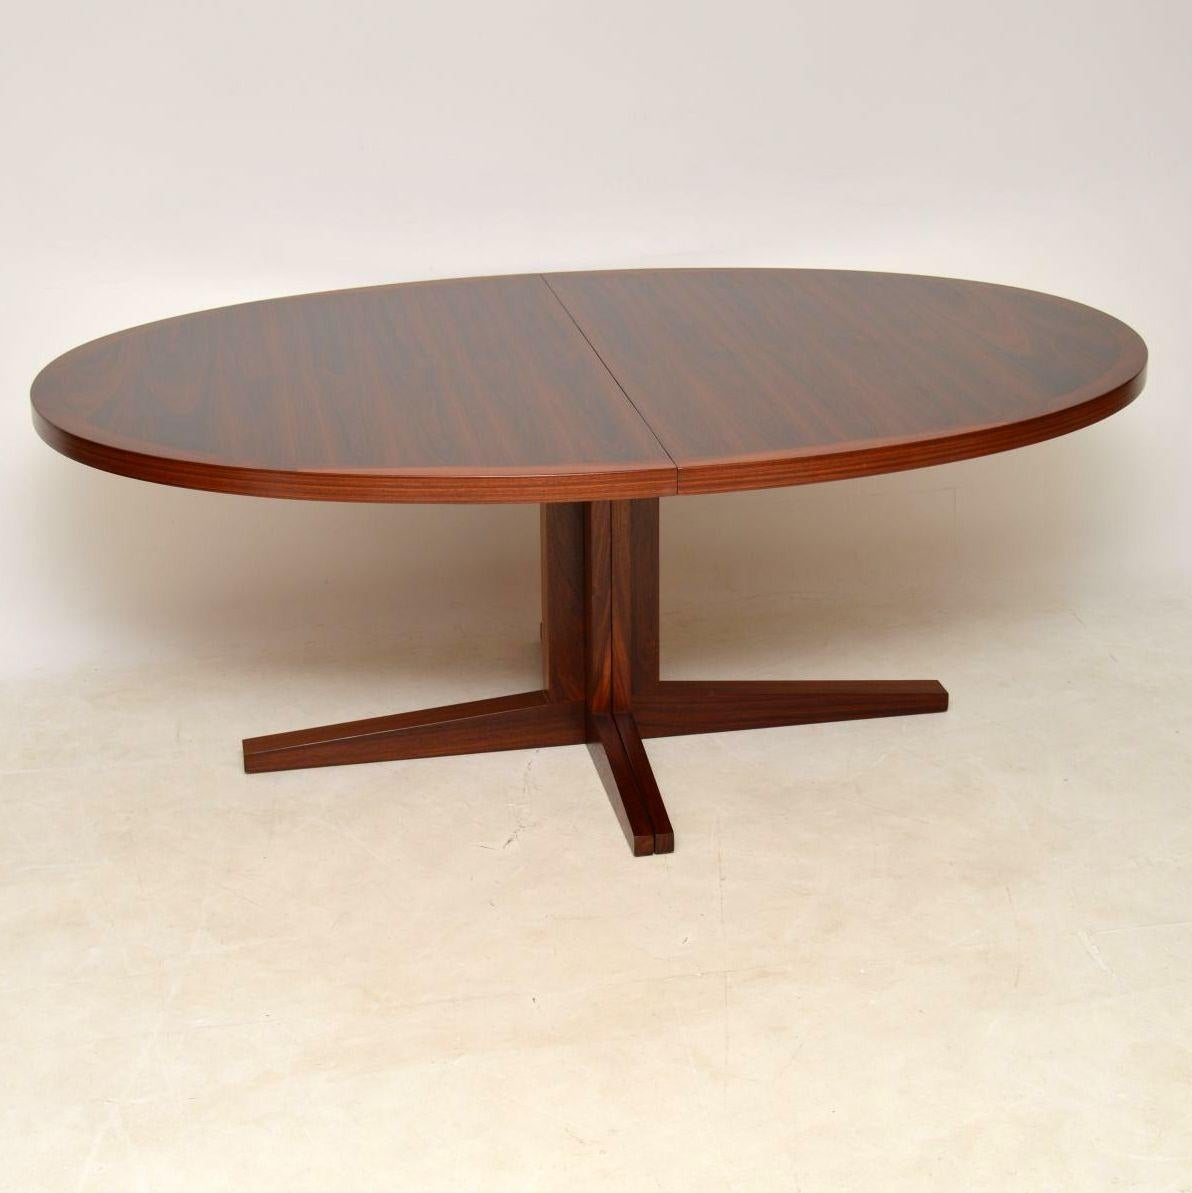 A stunning and top quality Danish wood vintage dining table, this was designed by John Mortensen for Heltborg mobler. It dates from the 1960s and is in absolutely superb condition throughout, we have had this fully stripped and re-polished to a very